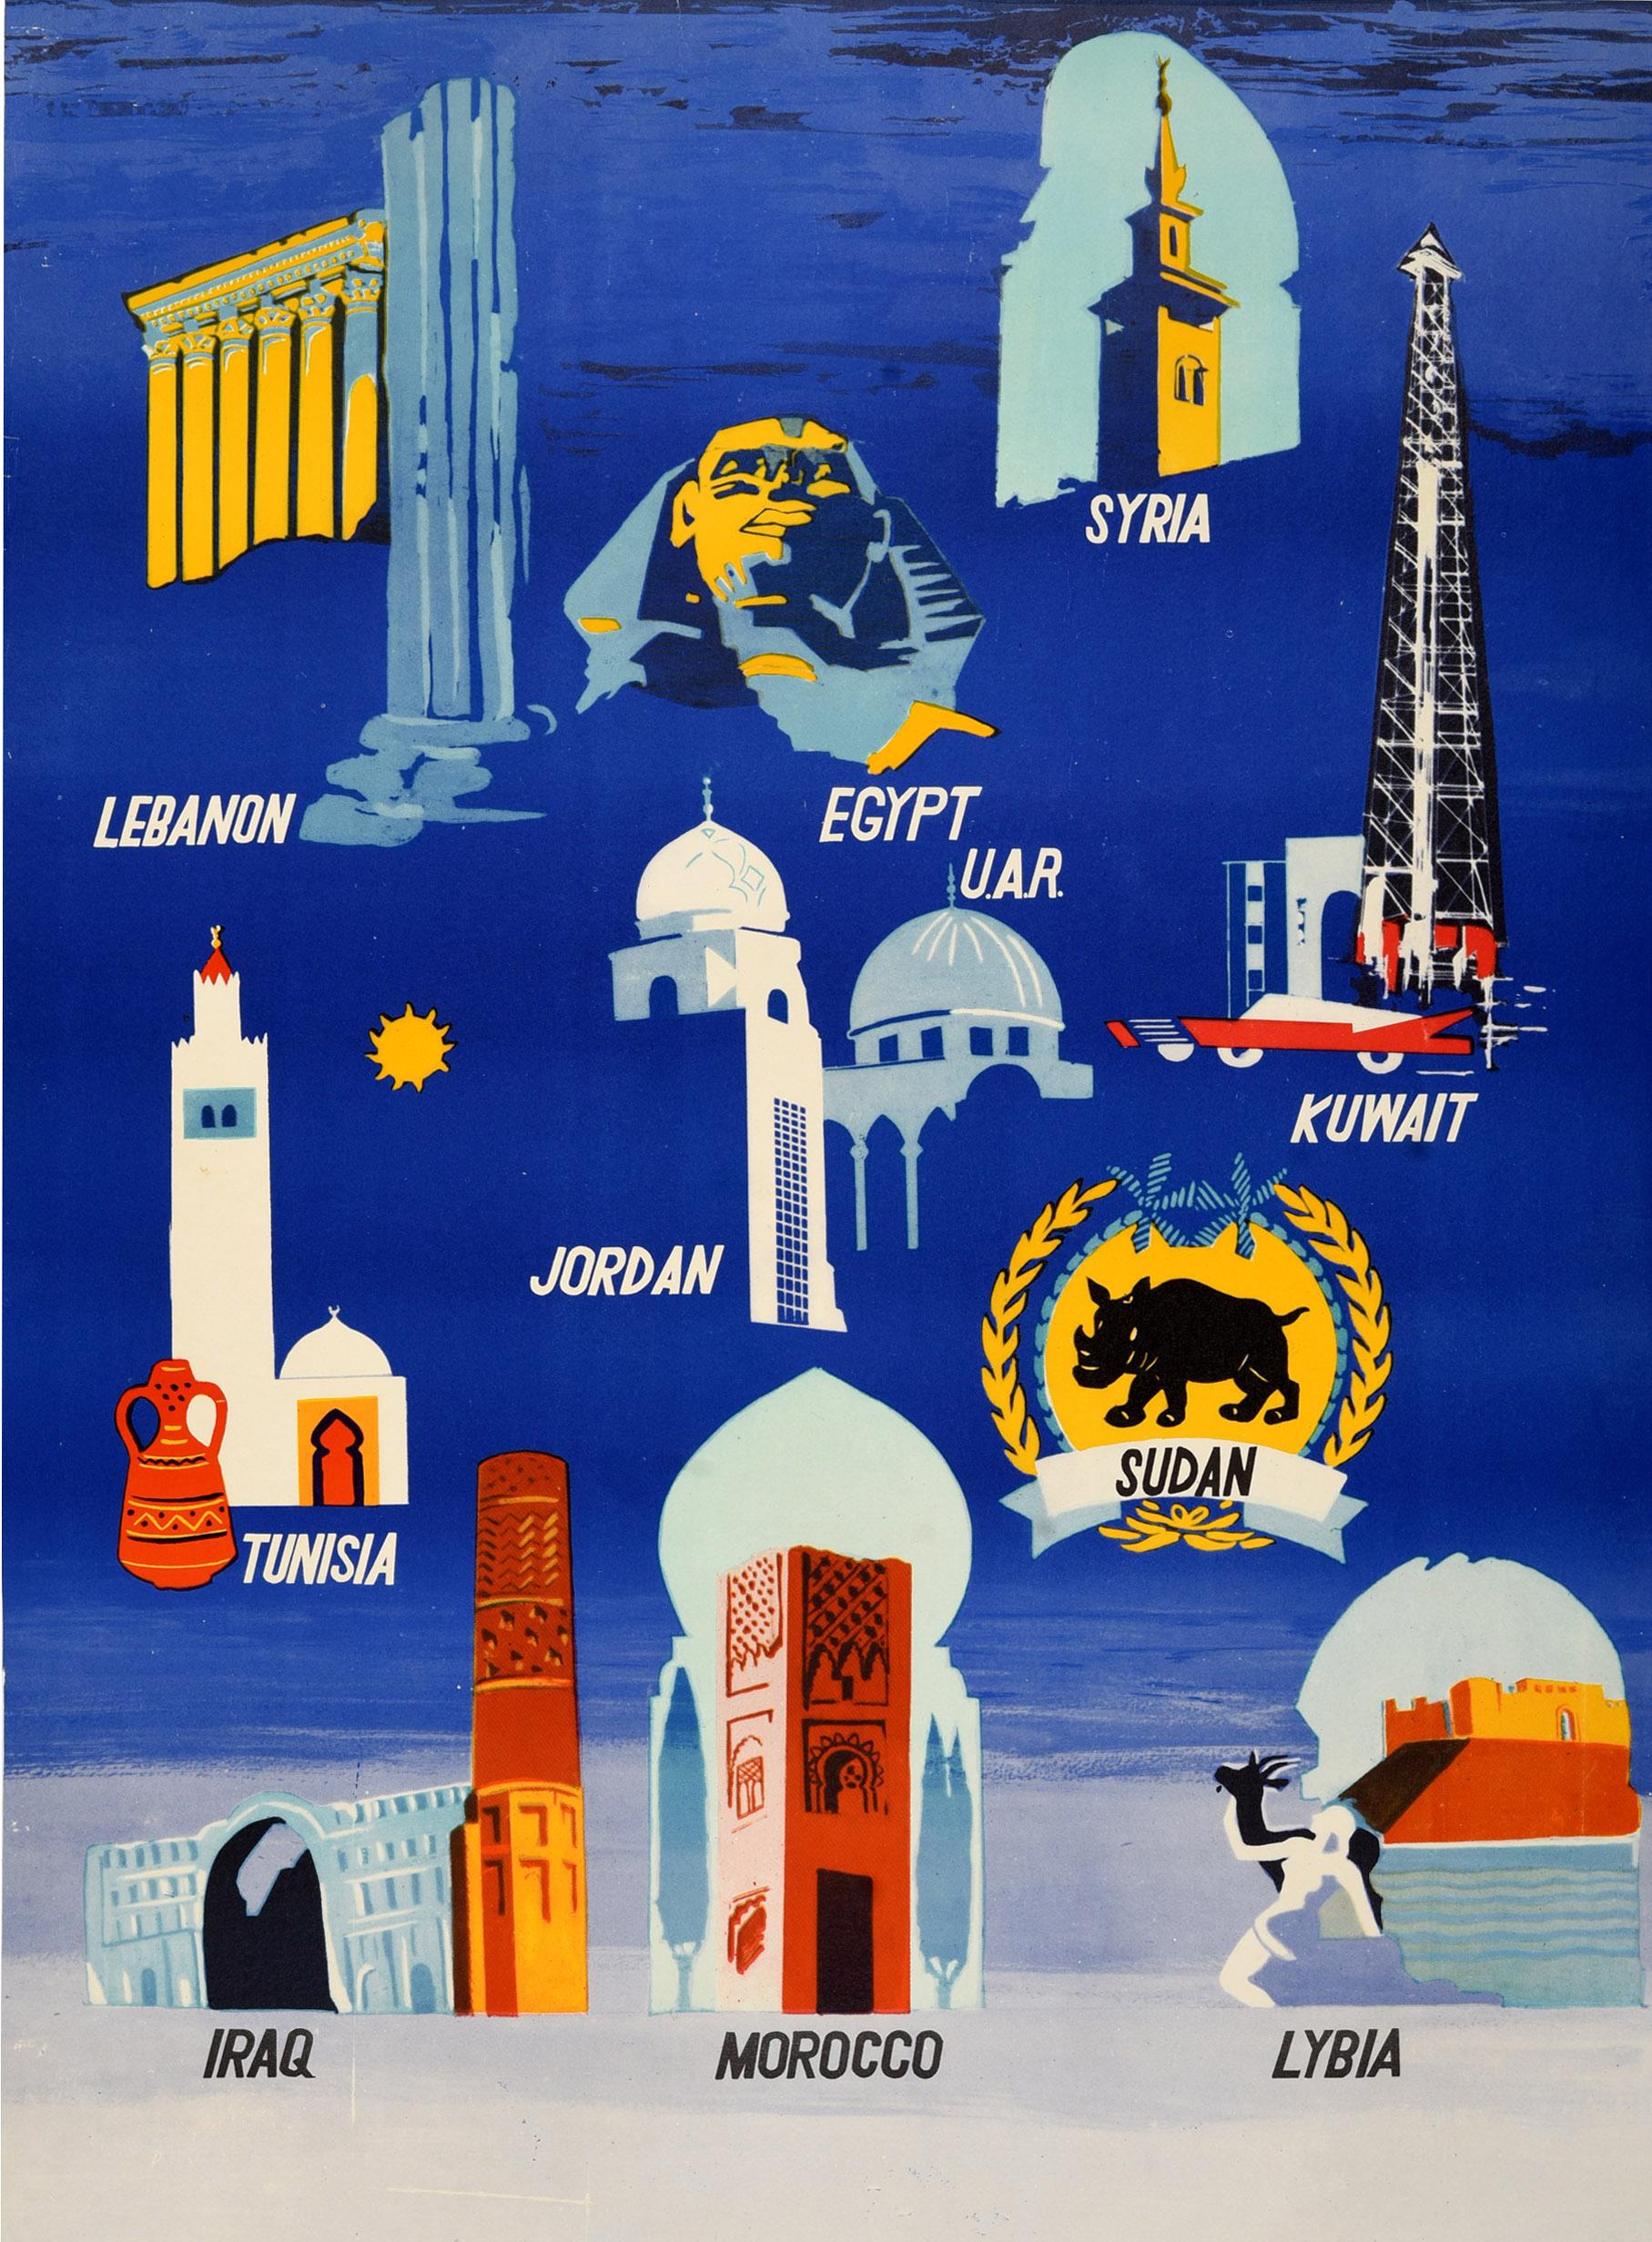 Original Vintage Travel Poster Visit The Arab States Africa Middle East Design - Print by Unknown